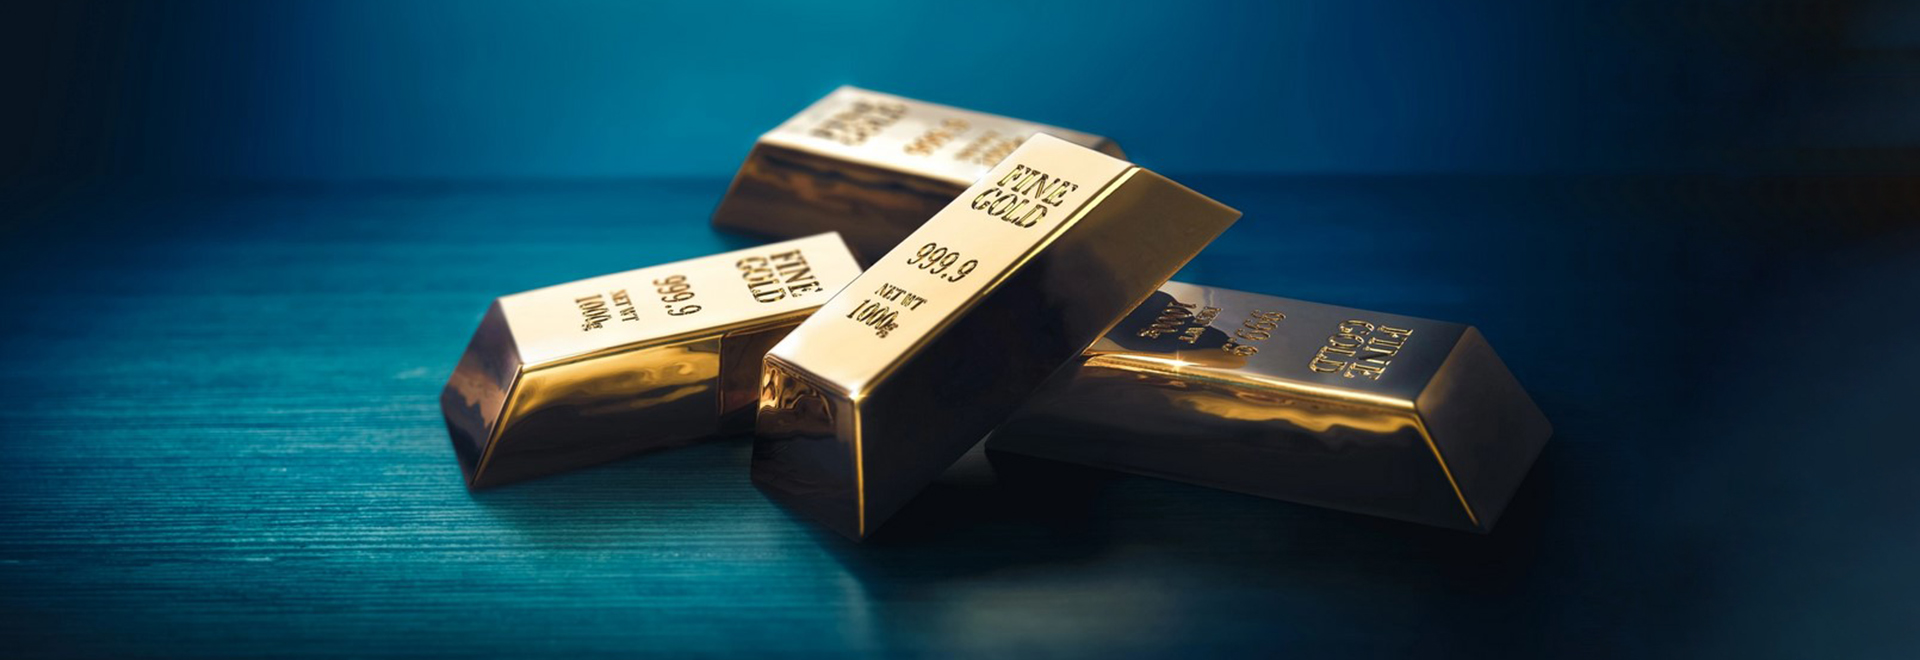 Gold Recovers as US Dollar Faces Challenges